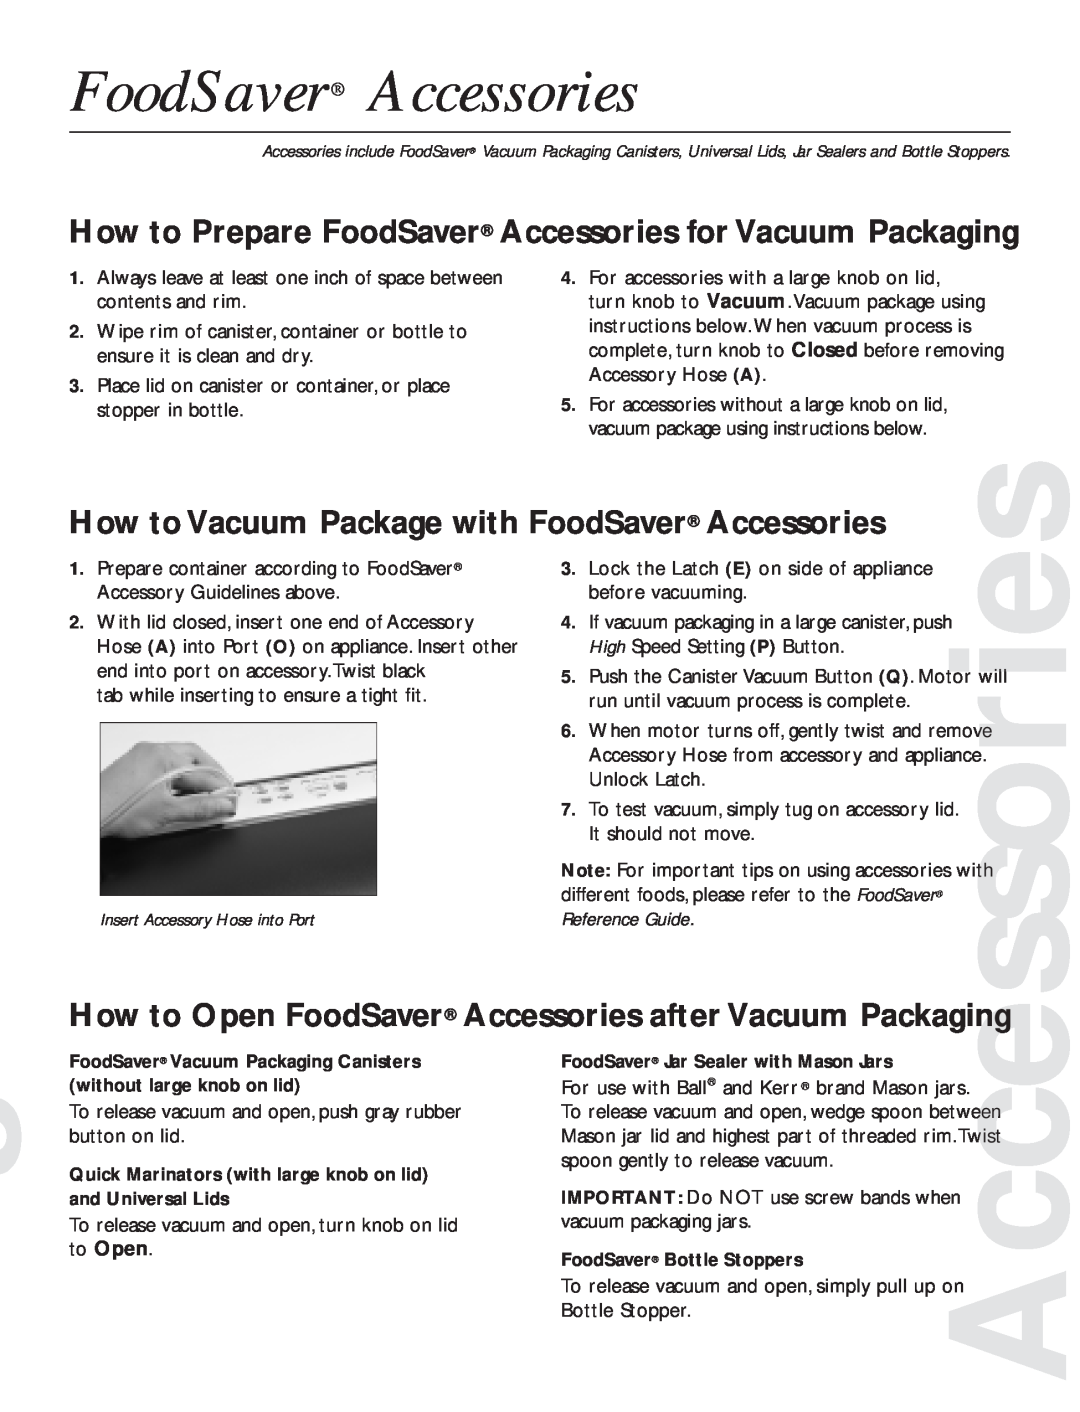 FoodSaver V2820 quick start How to Vacuum Package with FoodSaver Accessories, Accessories after Vacuum Packaging 